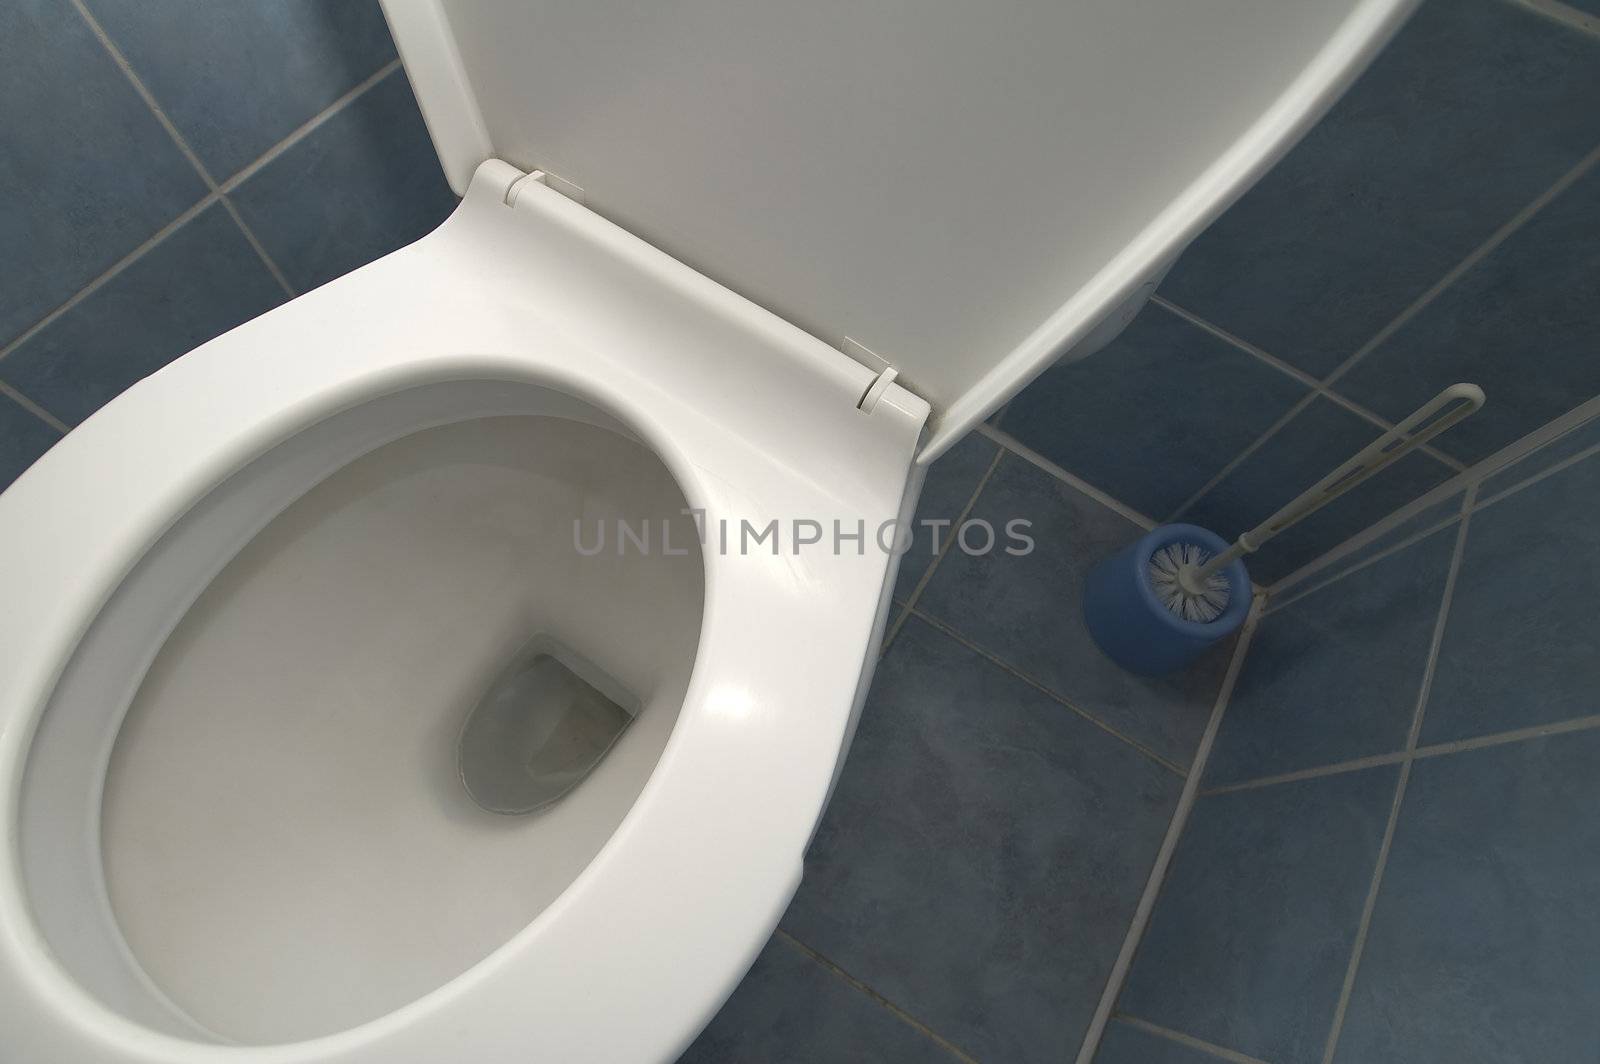 white clean toilet detail photo, blue tiled floor and walls